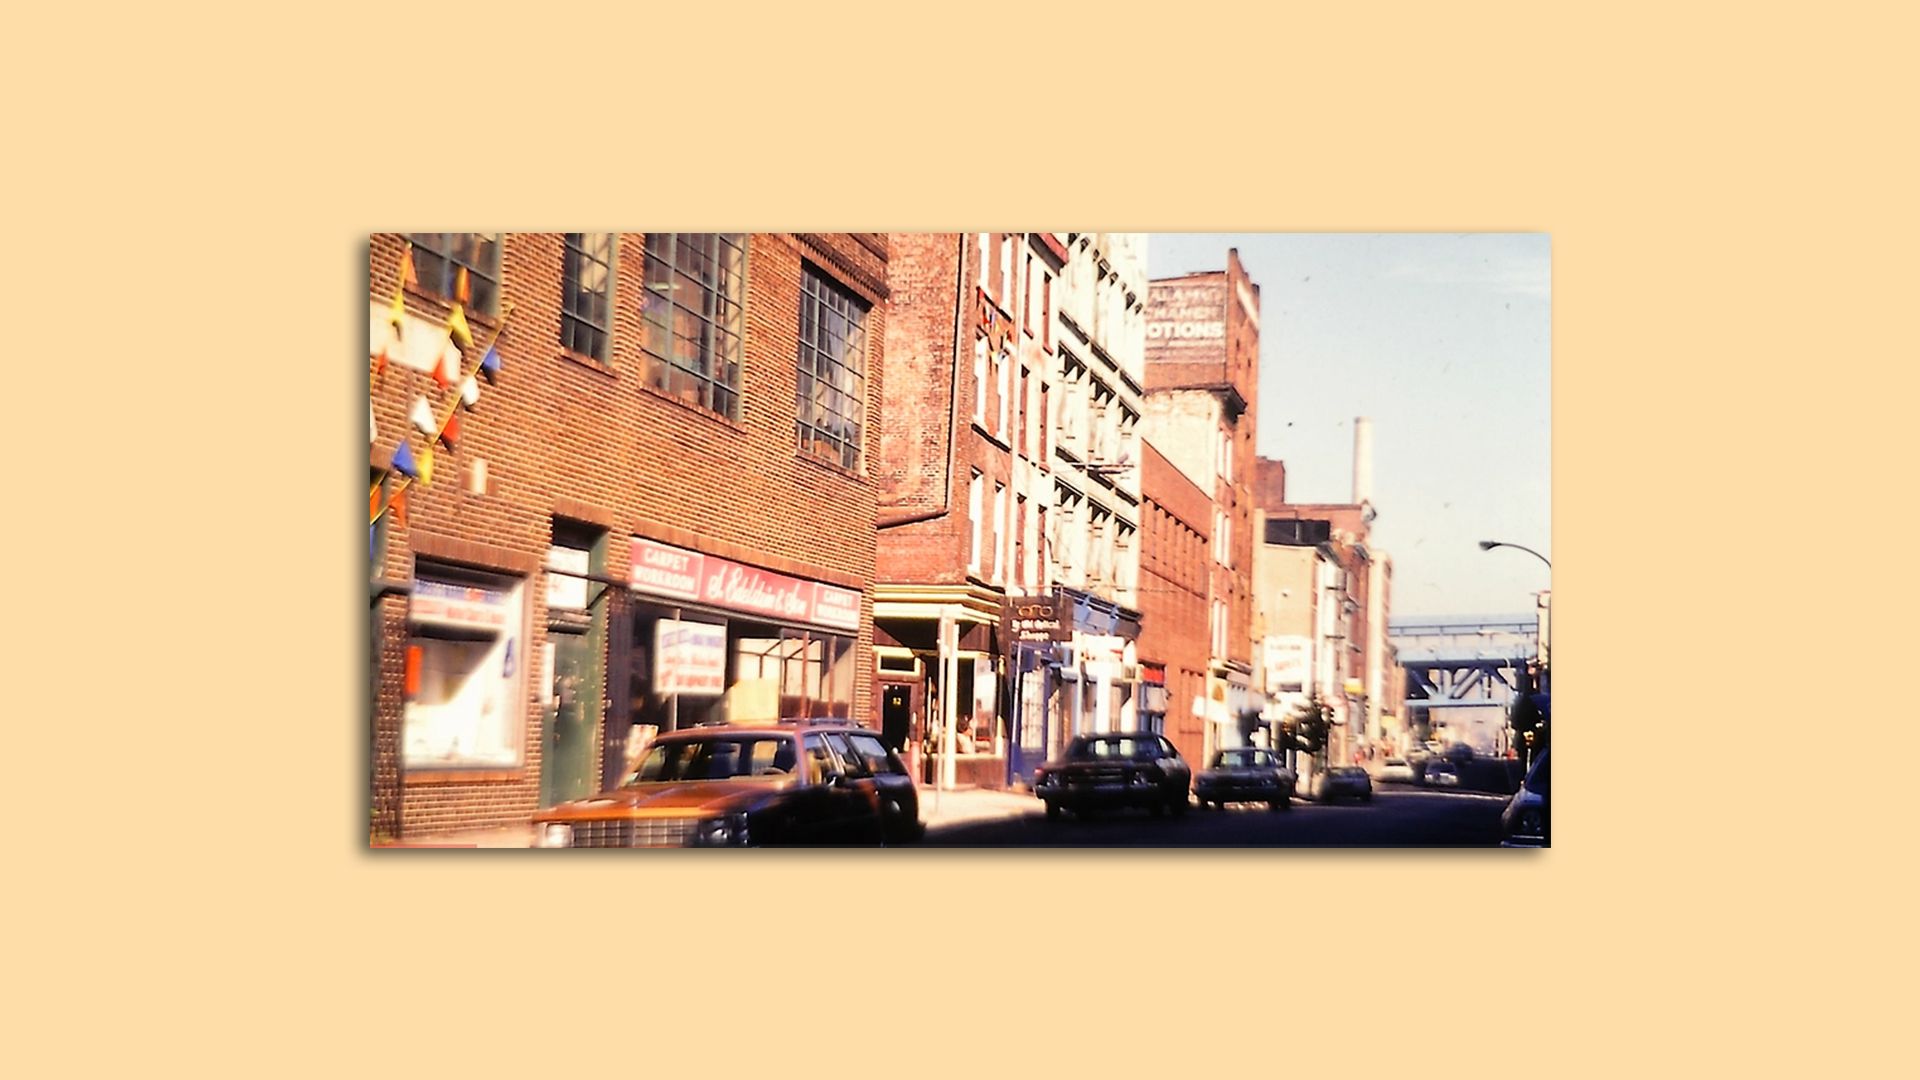 The Old City neighborhood circa 1976. Photo courtesy of Old City District 